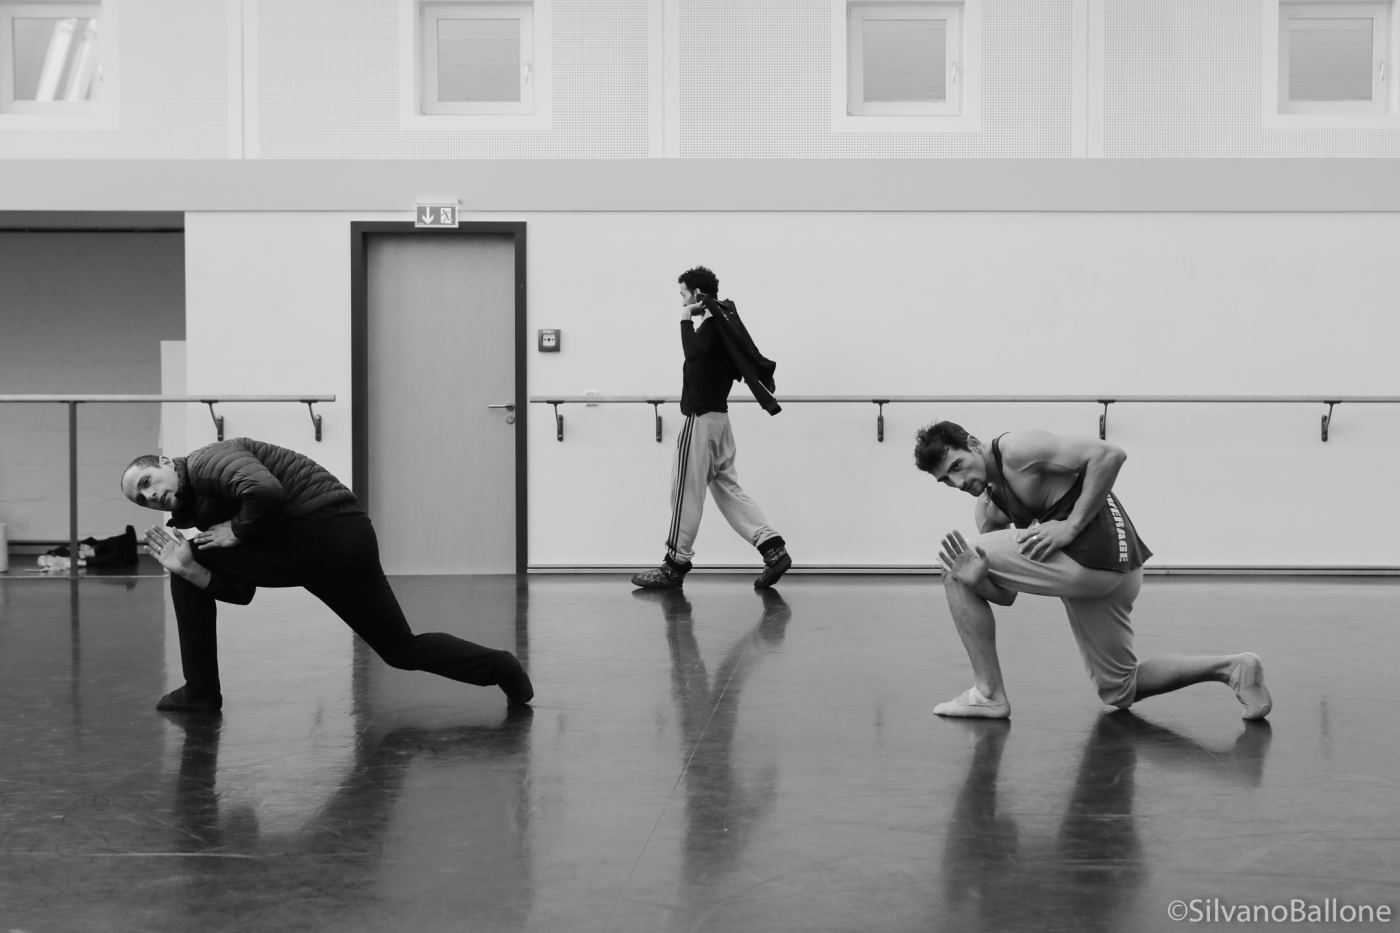 7. A.Mehrabyan and V.Martirosyan, rehearsal 2019, Forceful Feelings © S.Ballone